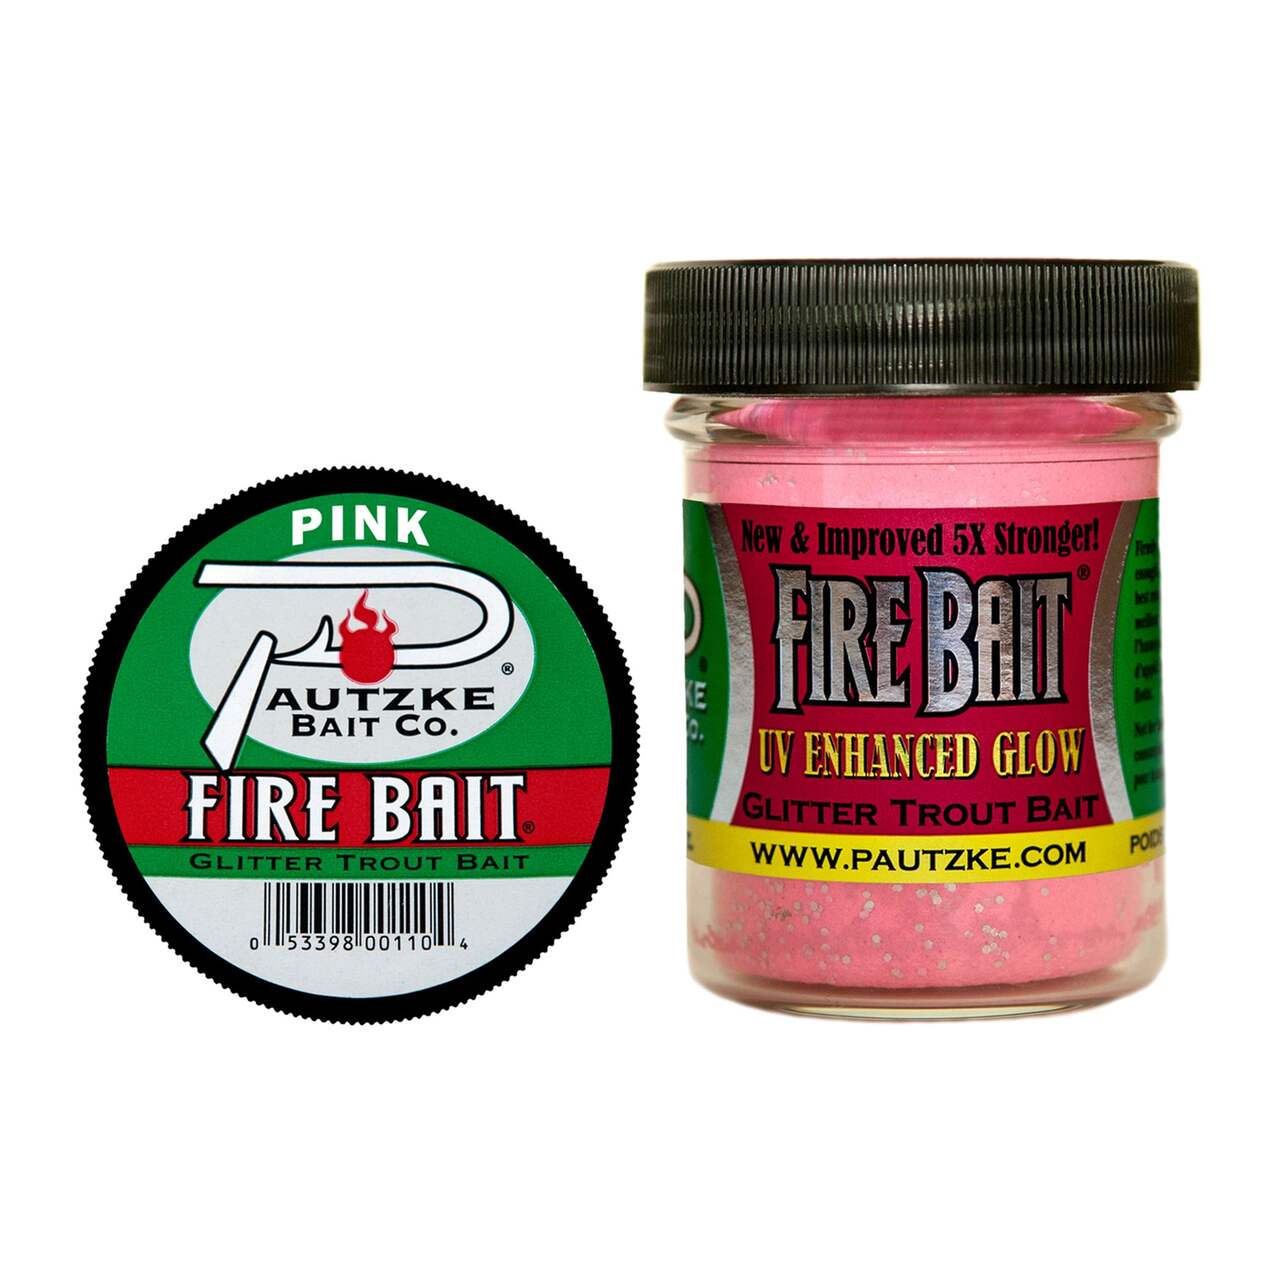 https://media-www.canadiantire.ca/product/playing/fishing/fishing-lures/0777709/pautzke-fire-bait-pink-1-5oz-c9a0fffa-64fb-4b82-a56d-1420f2ebe552-jpgrendition.jpg?imdensity=1&imwidth=640&impolicy=mZoom